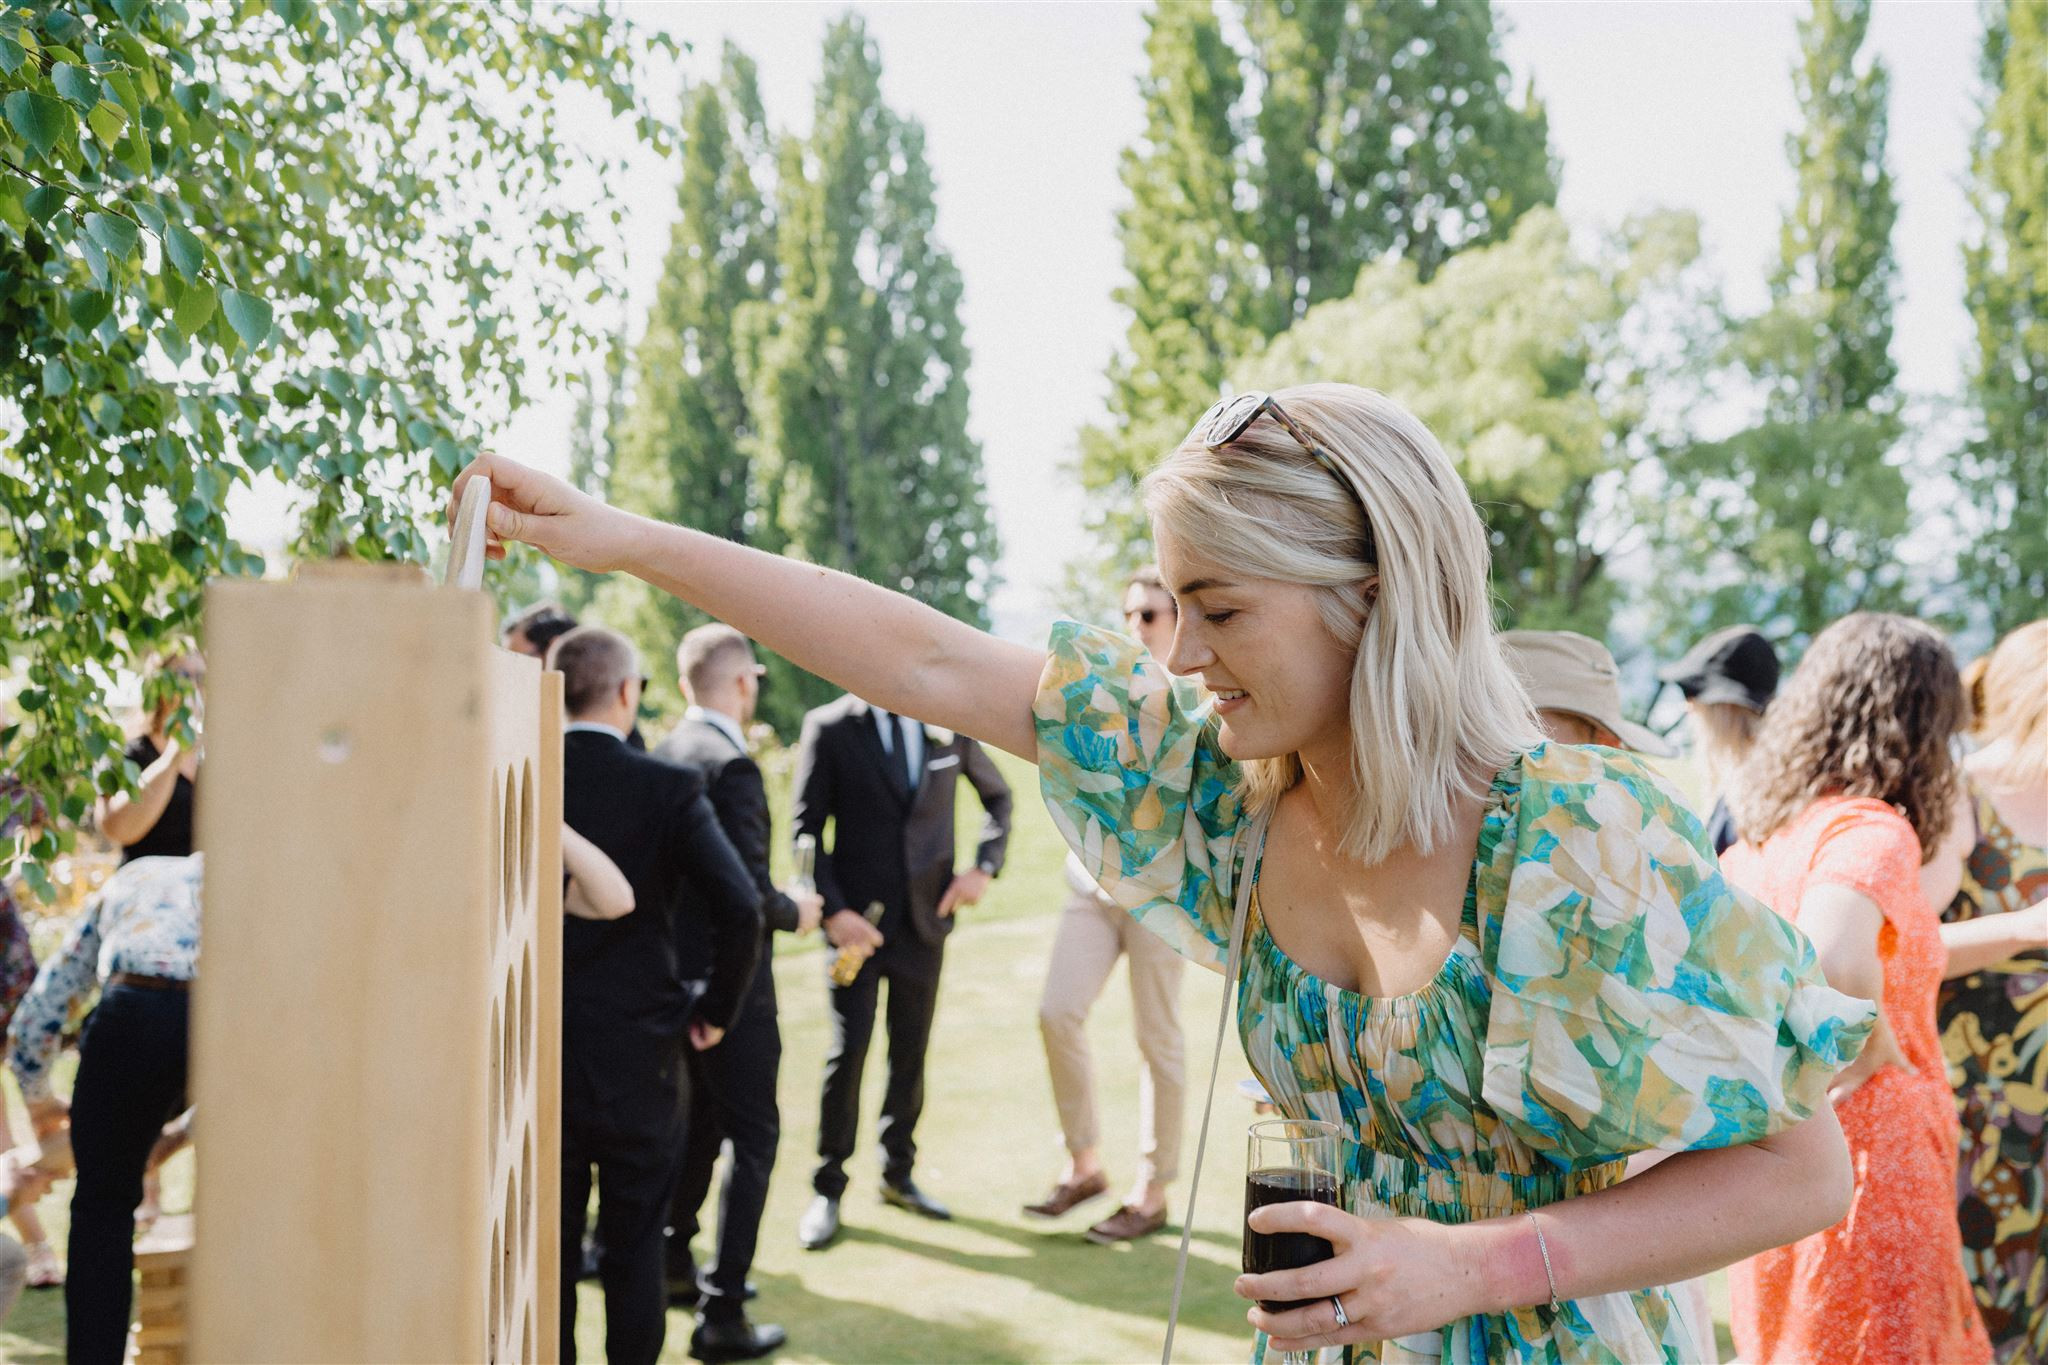 S playing connect four at Edgewater, a central otago wedding venue